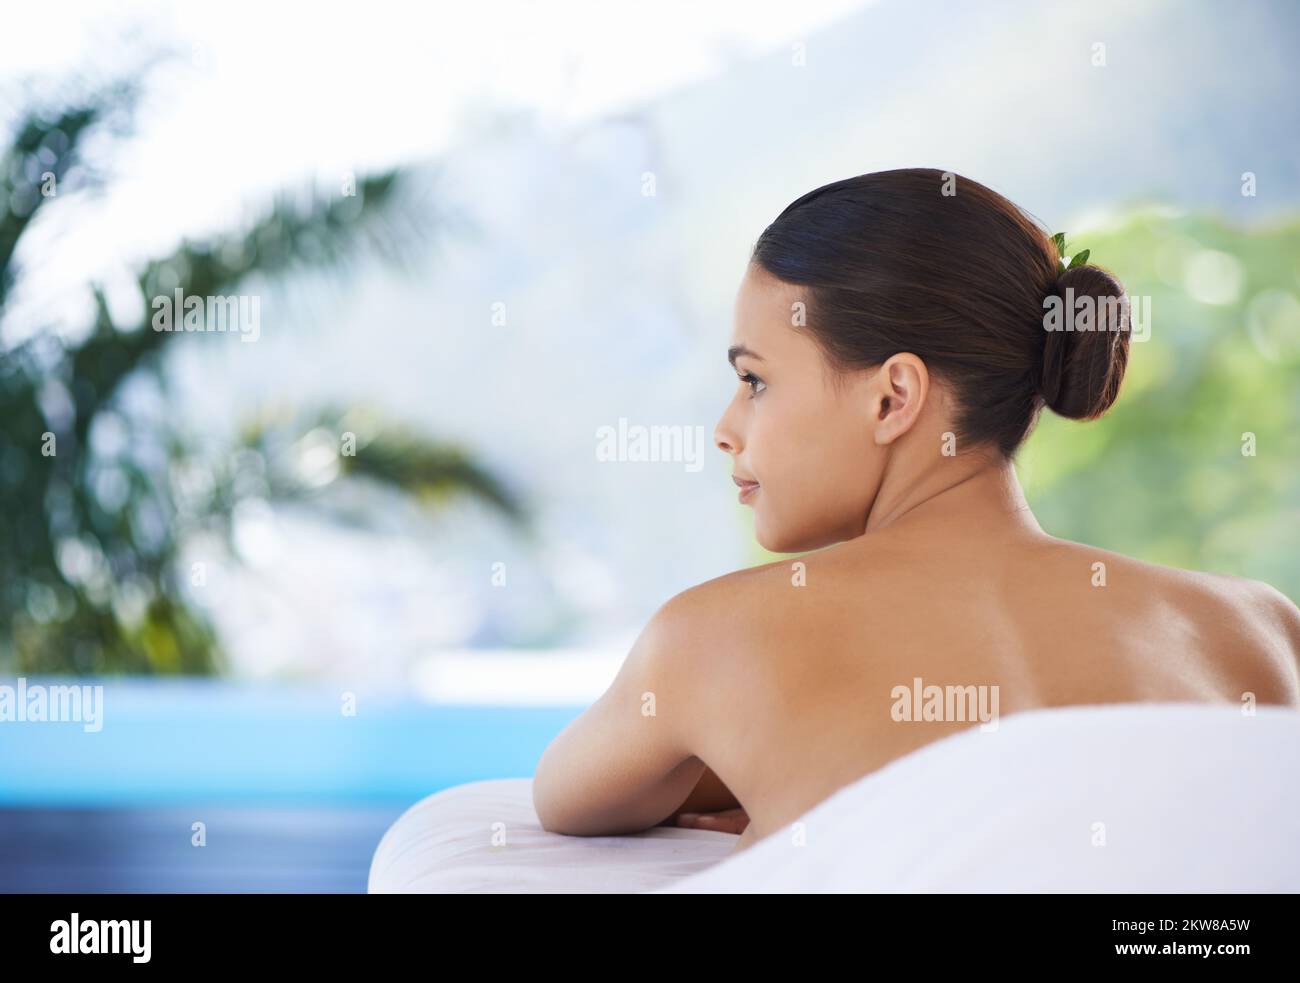 Views to help you take your mind off...everything. A young woman relaxing in a health spa. Stock Photo